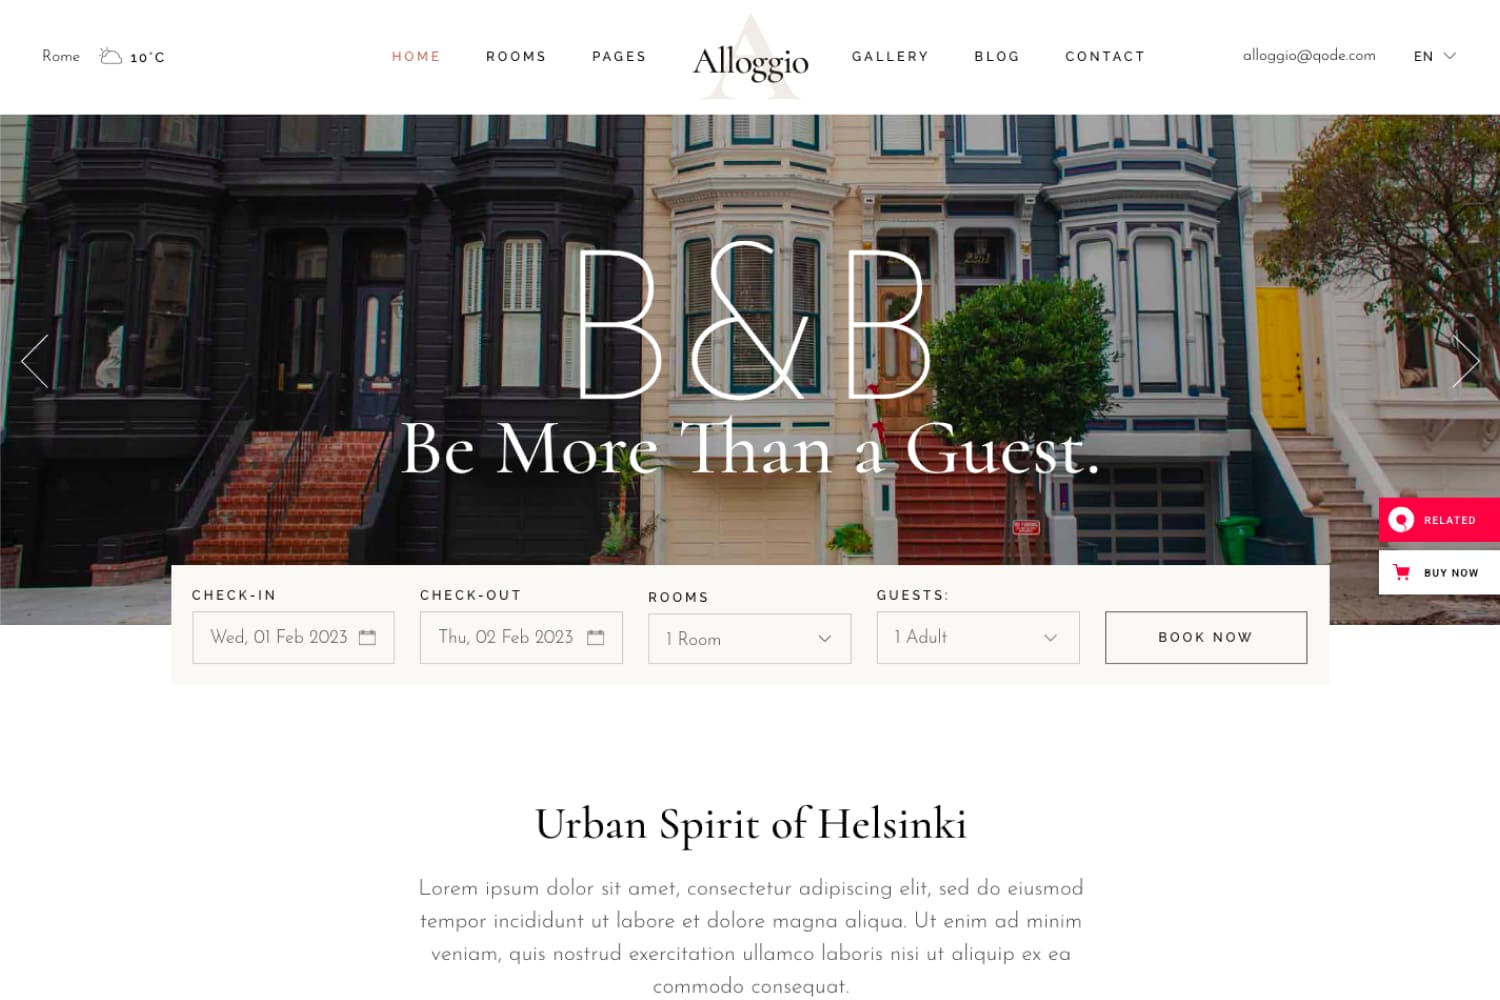 Main page of the hotel website with a photo of the facade and parameters for booking.